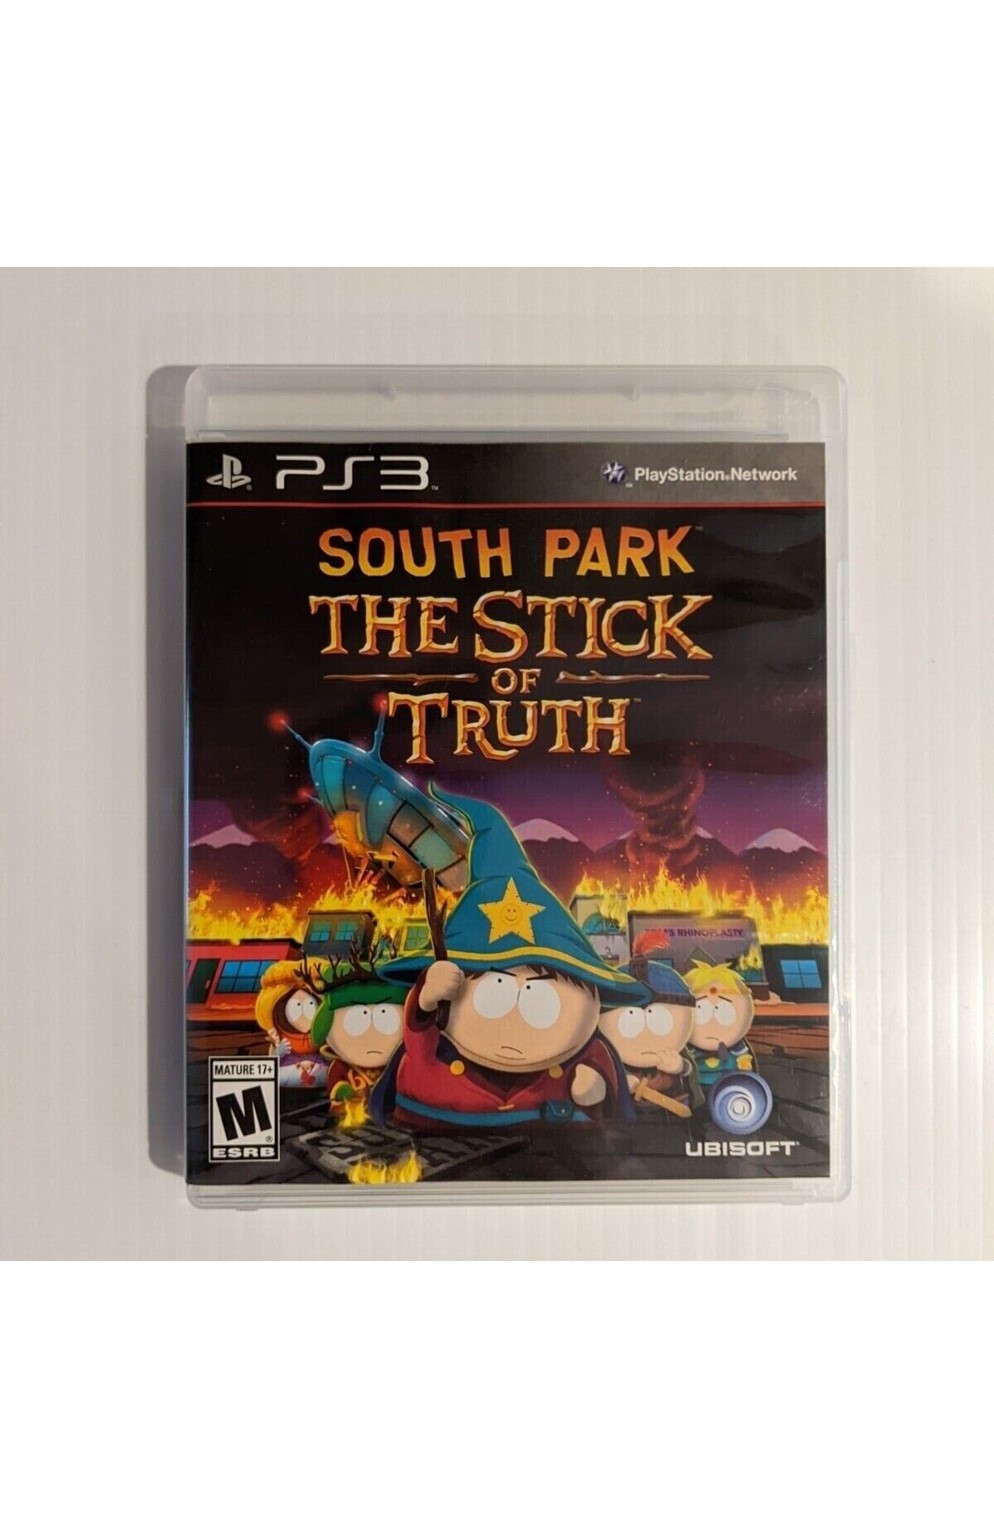 Playstation 3 Ps3 South Park The Stick of Truth